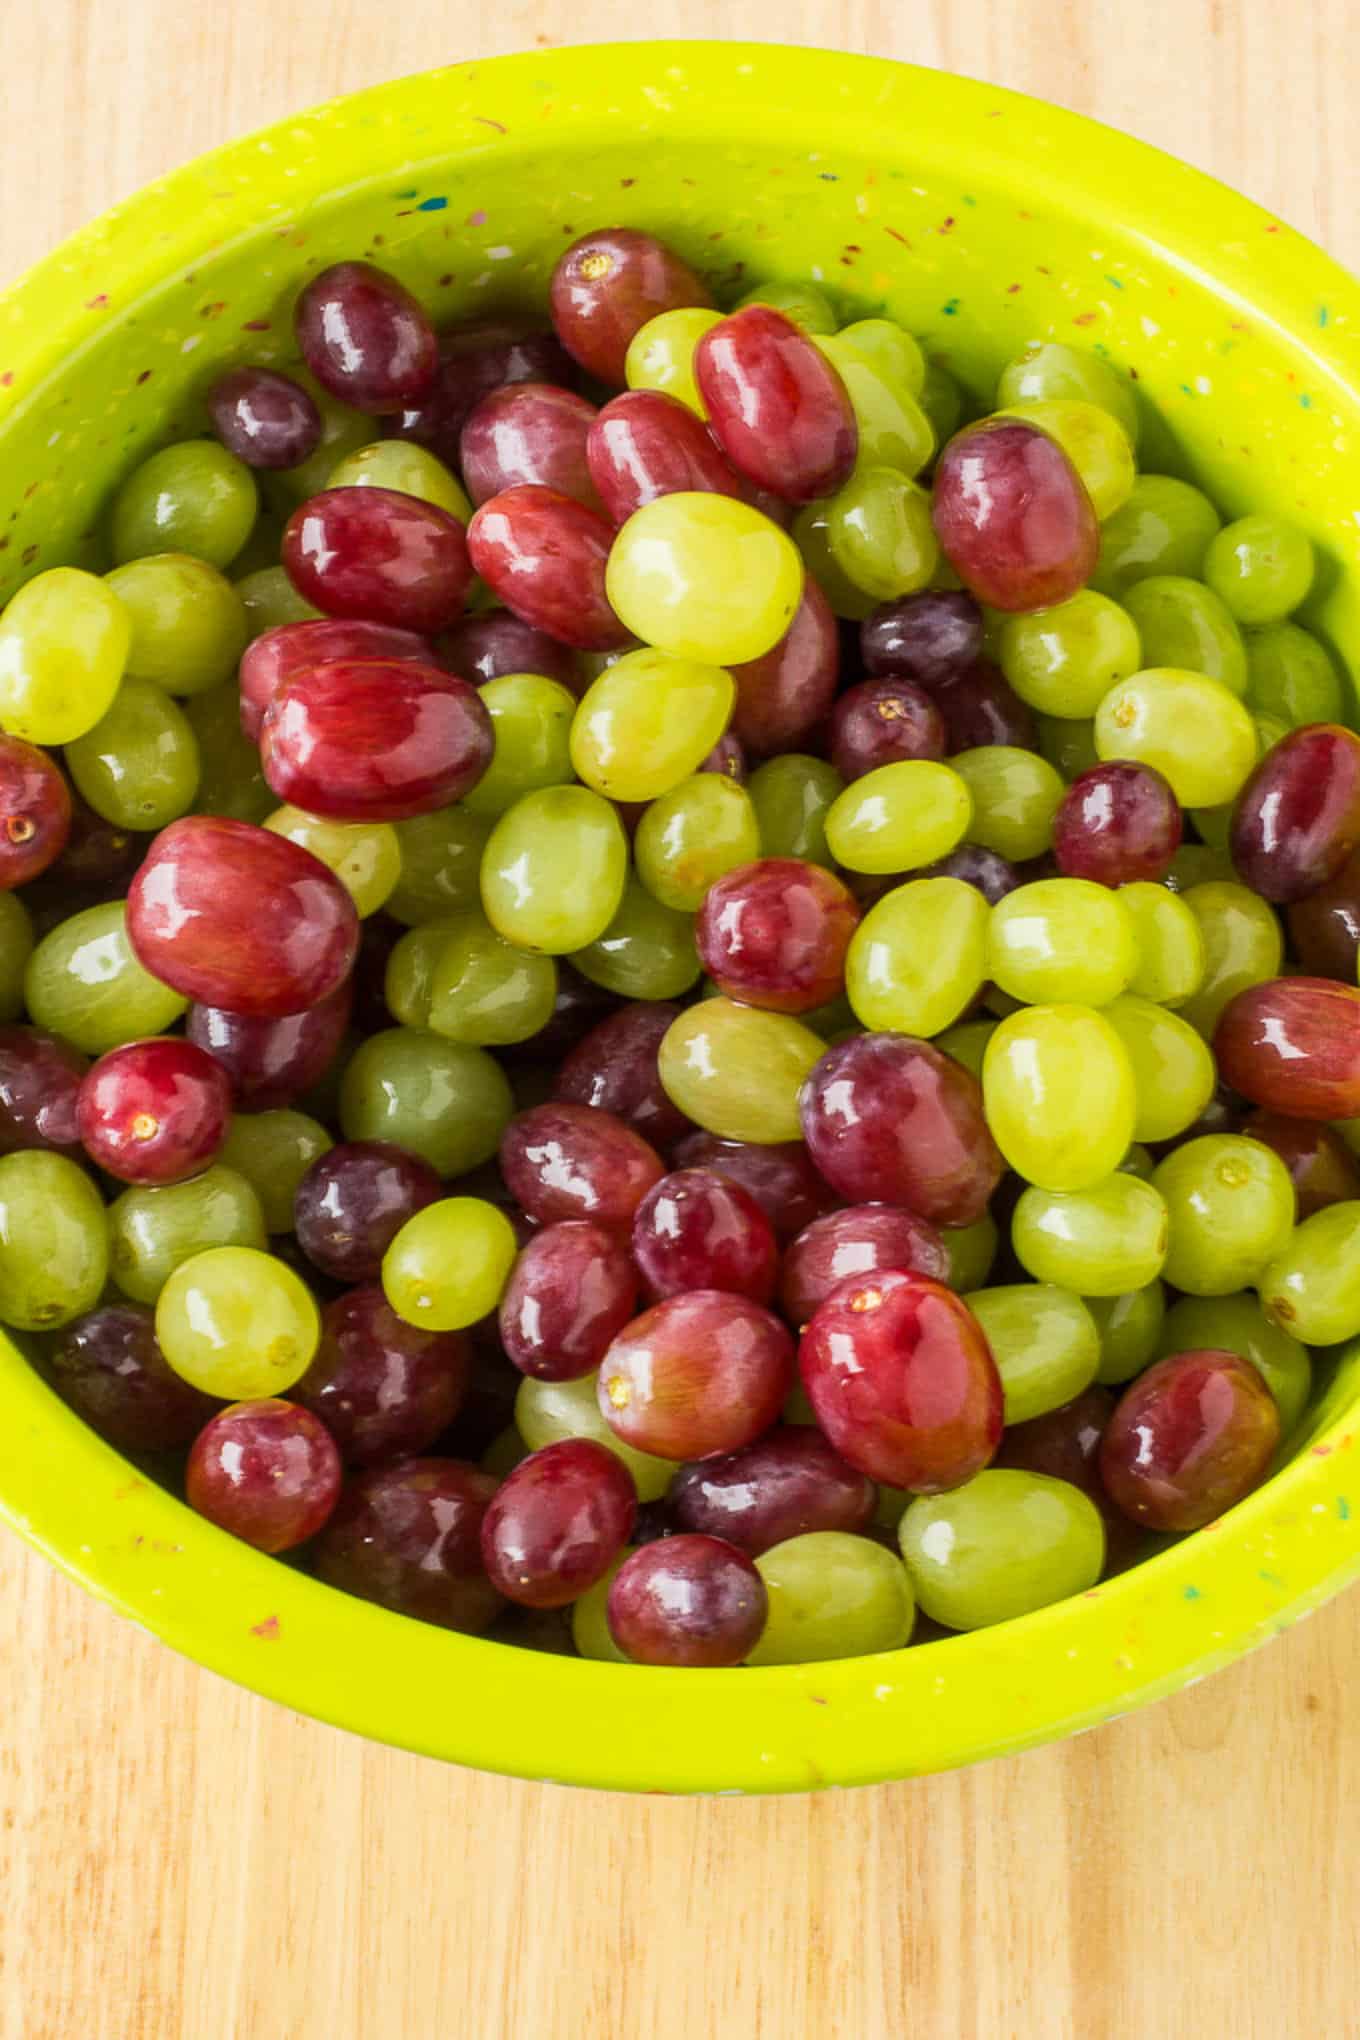 A bowl of washed fresh red and green grapes on the table.